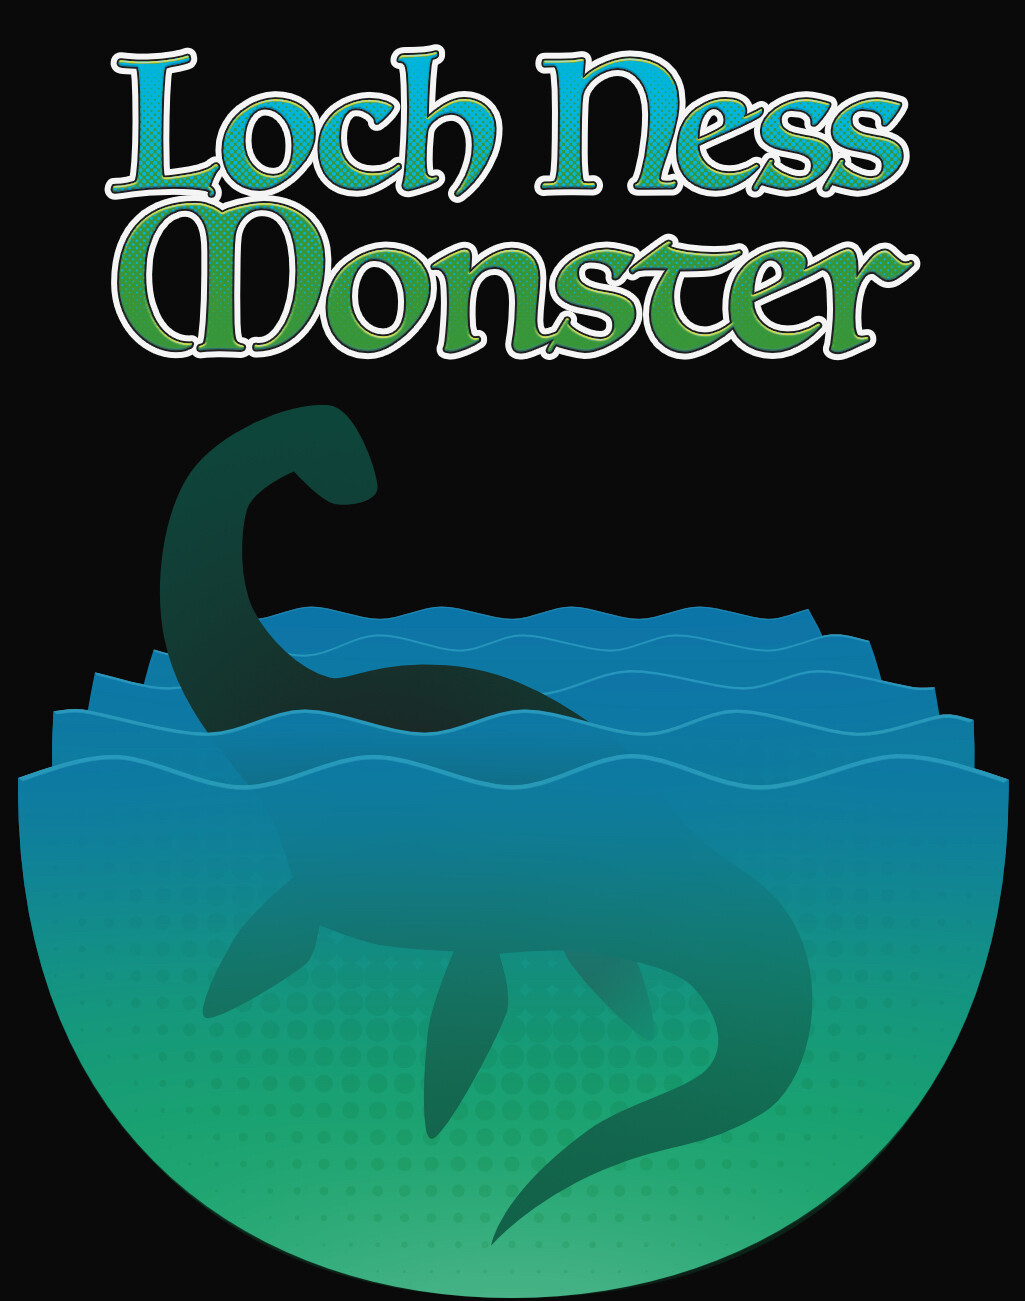 Neato (high-quality t-shirts, large sizes):
https://www.neatoshop.com/product/Cryptid-Legend-Loch-Ness-Monster
TeePublic (affordable shirts and stickers):
https://www.teepublic.com/t-shirt/36815418-cryptid-legend-loch-ness-monster?store_id=2013963